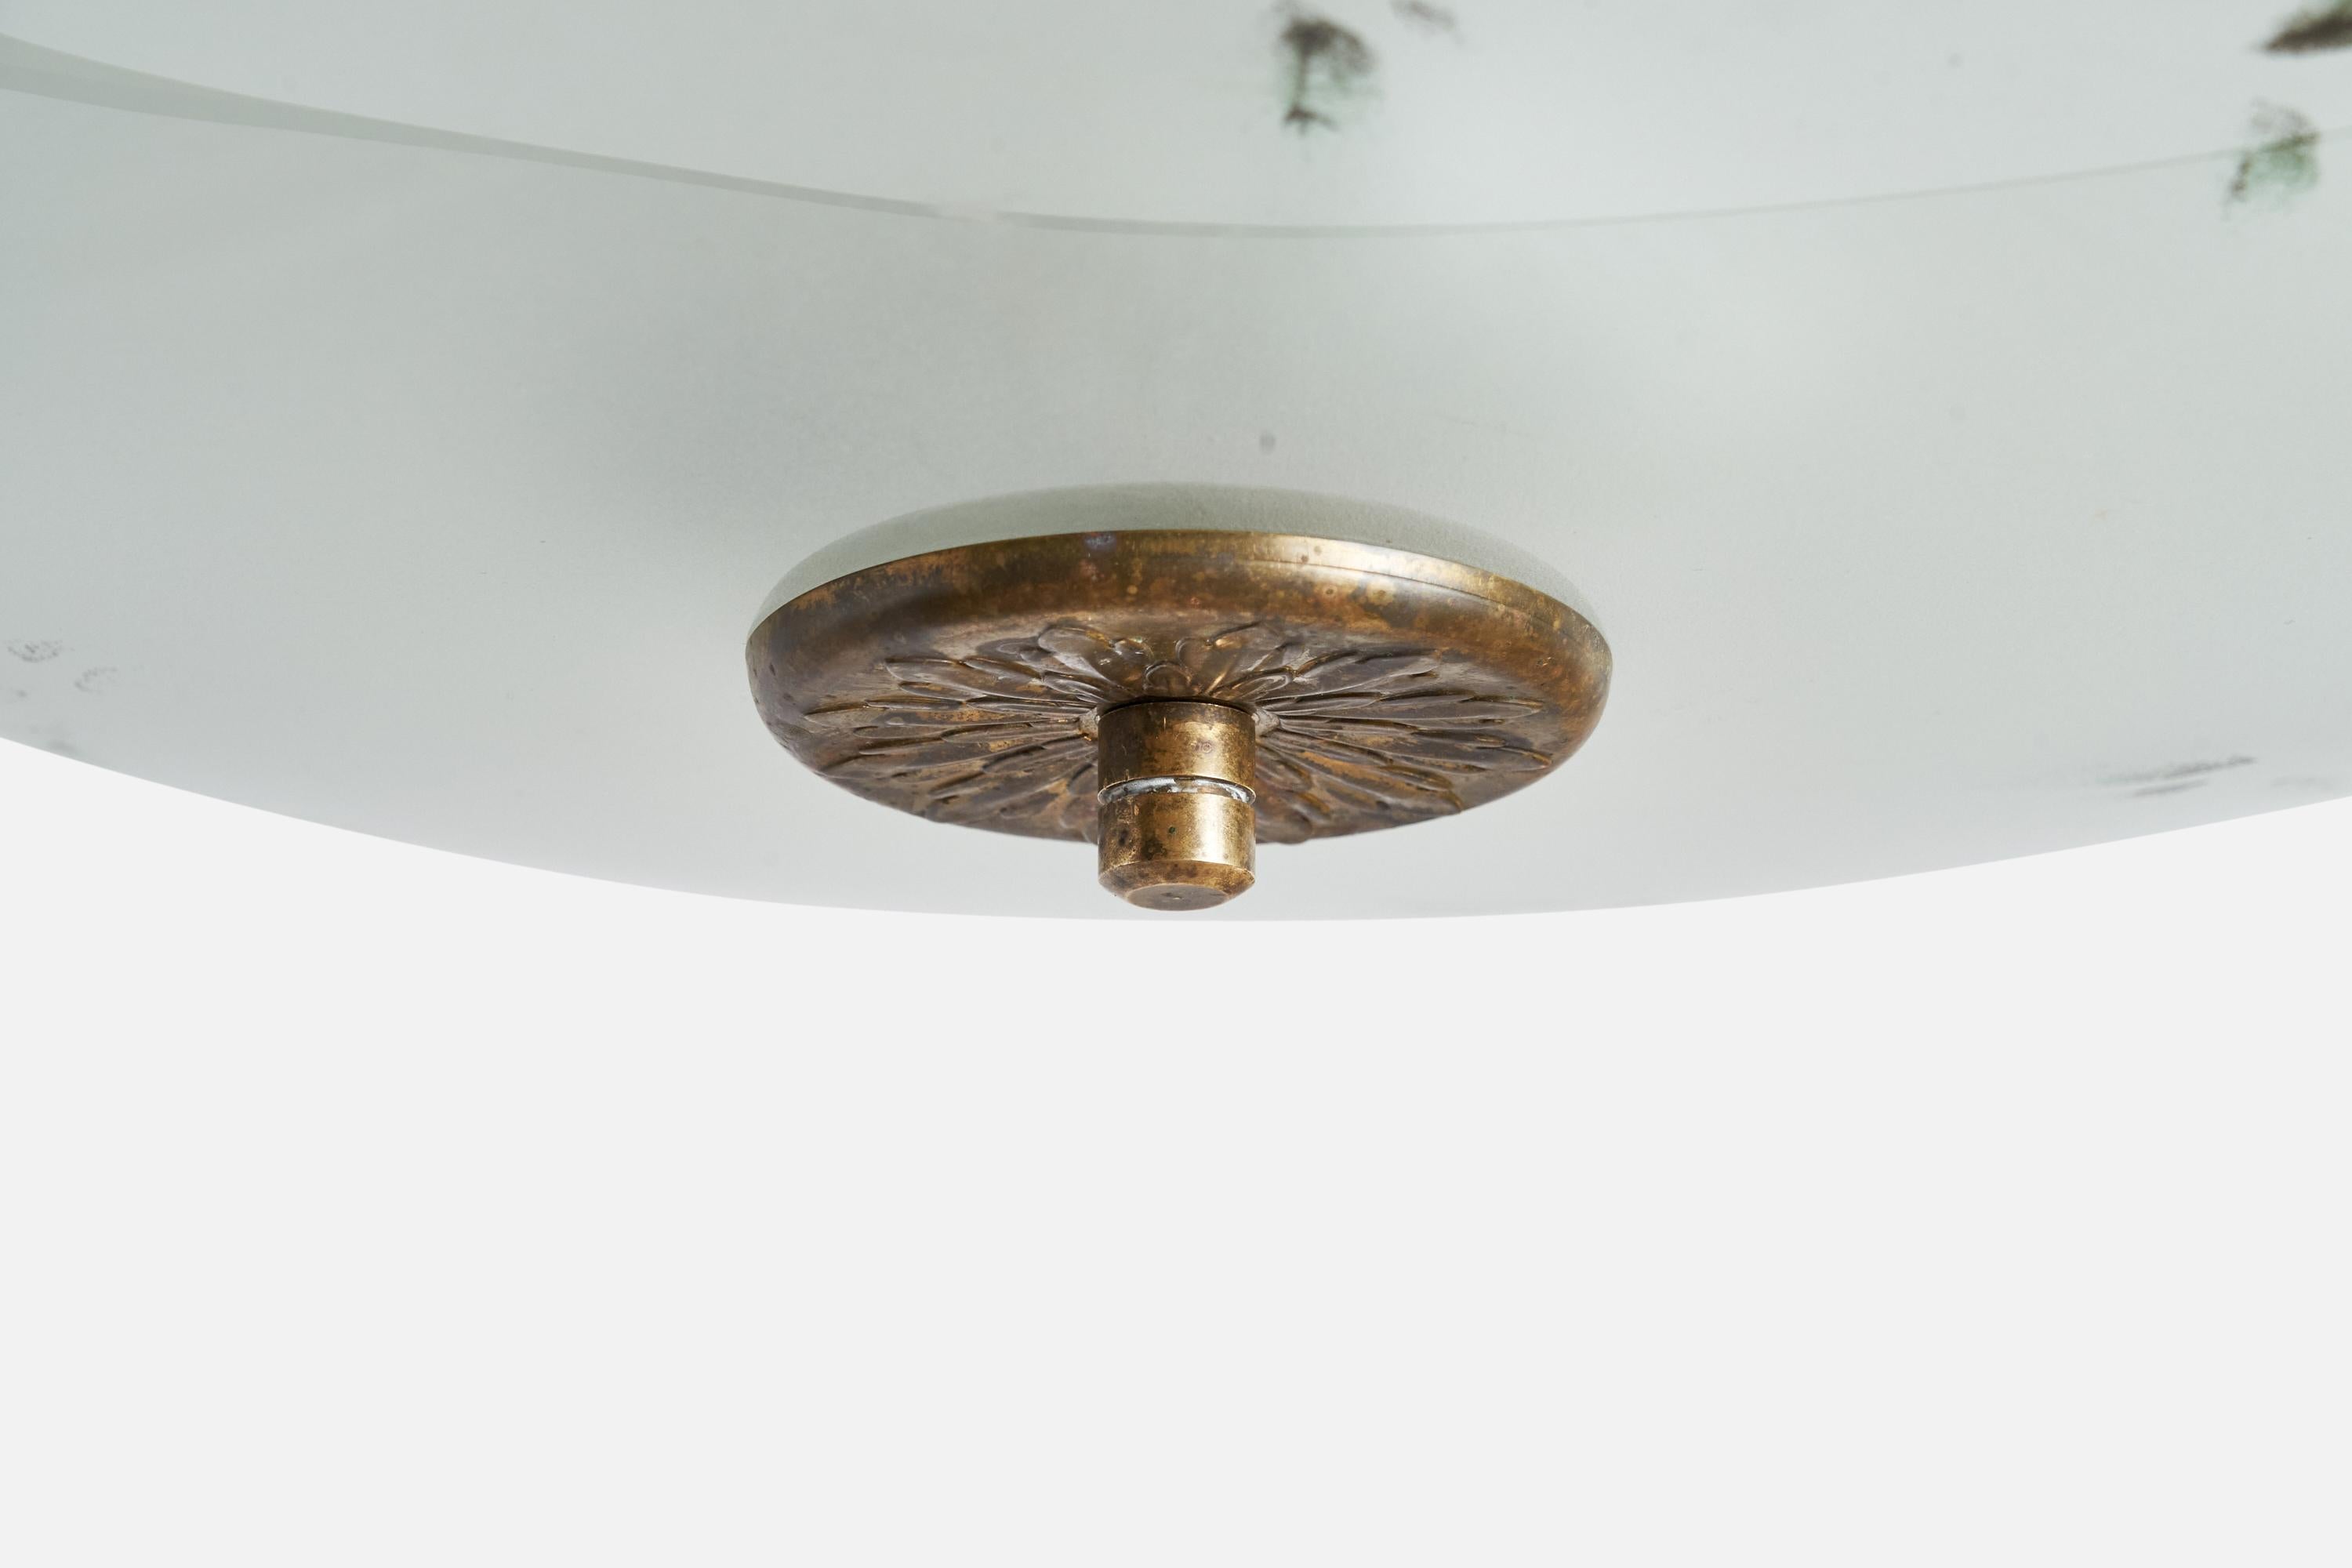 A brass and glass pendant light designed and produced in Sweden, 1930s.

Dimensions of canopy (inches): 2”  H x 3.5” Diameter
Socket takes standard E-26 bulbs. 2 sockets.There is no maximum wattage stated on the fixture. All lighting will be